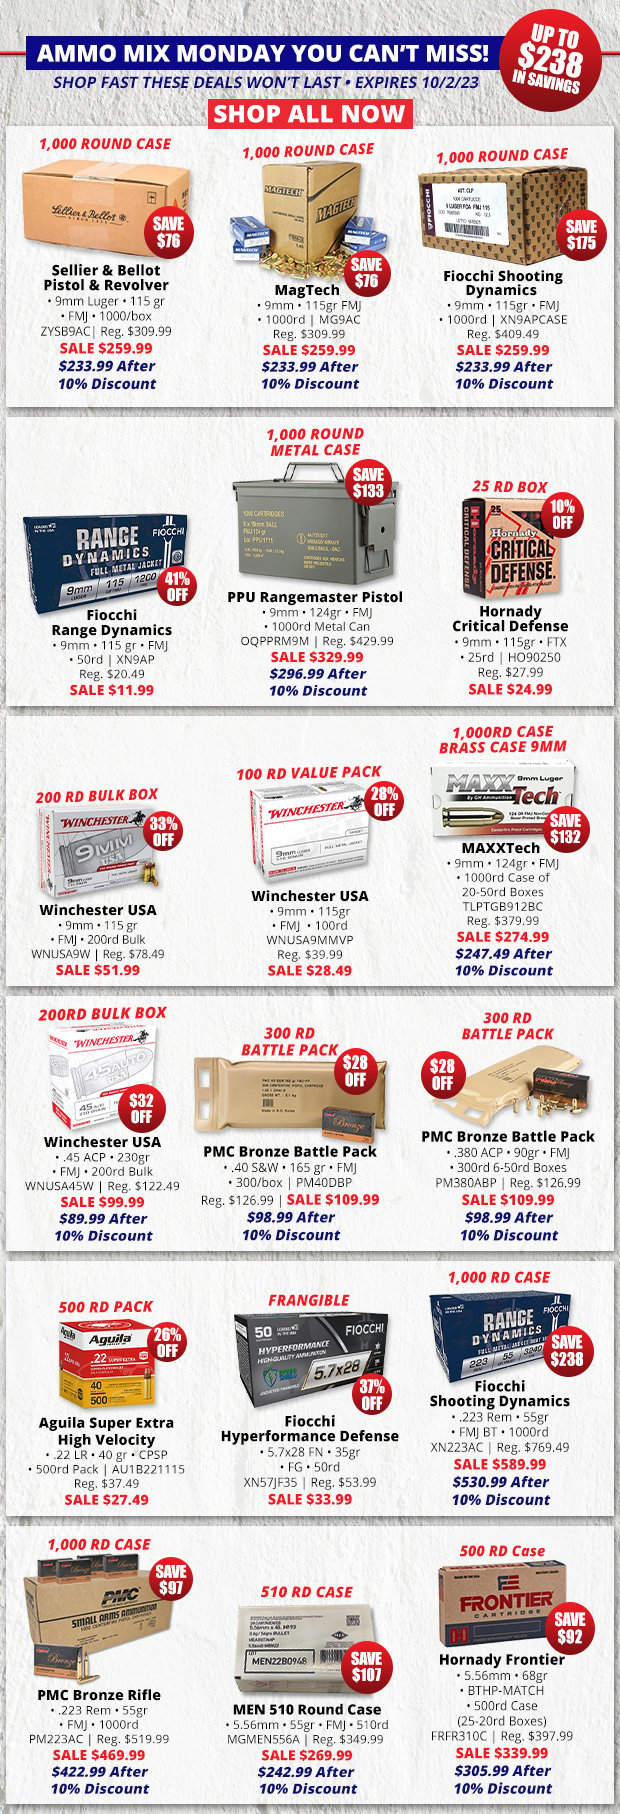 Up to $238 in Savings for Ammo Mix Monday